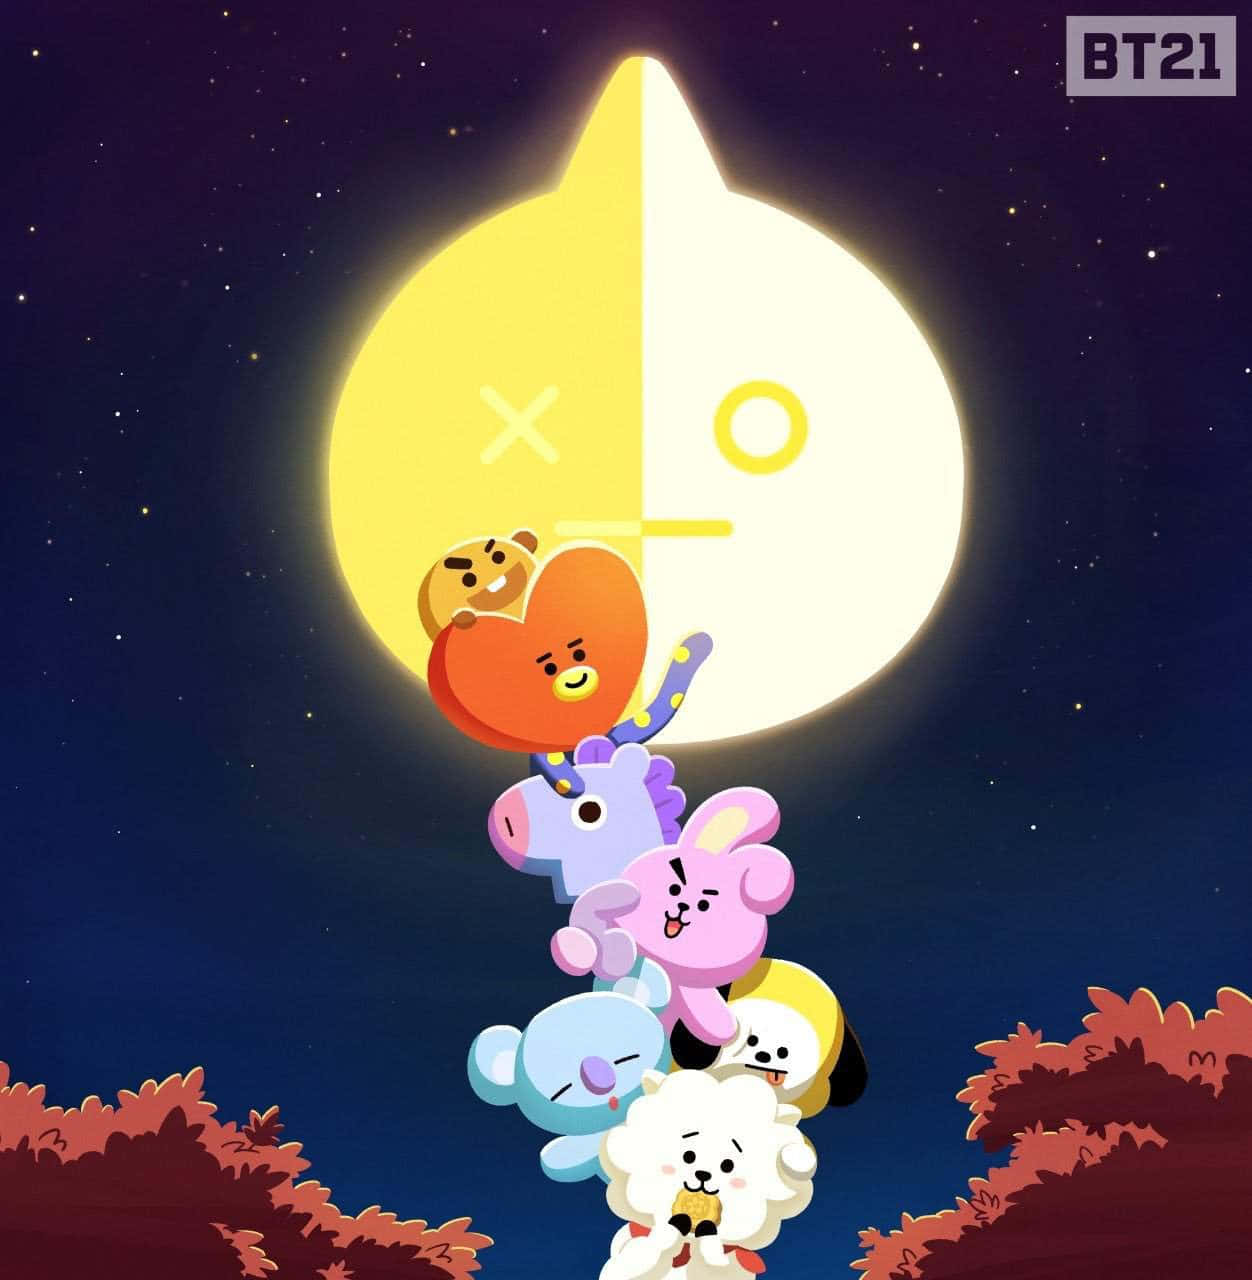 Cutest&Funniest BFF's - Bt21 Characters